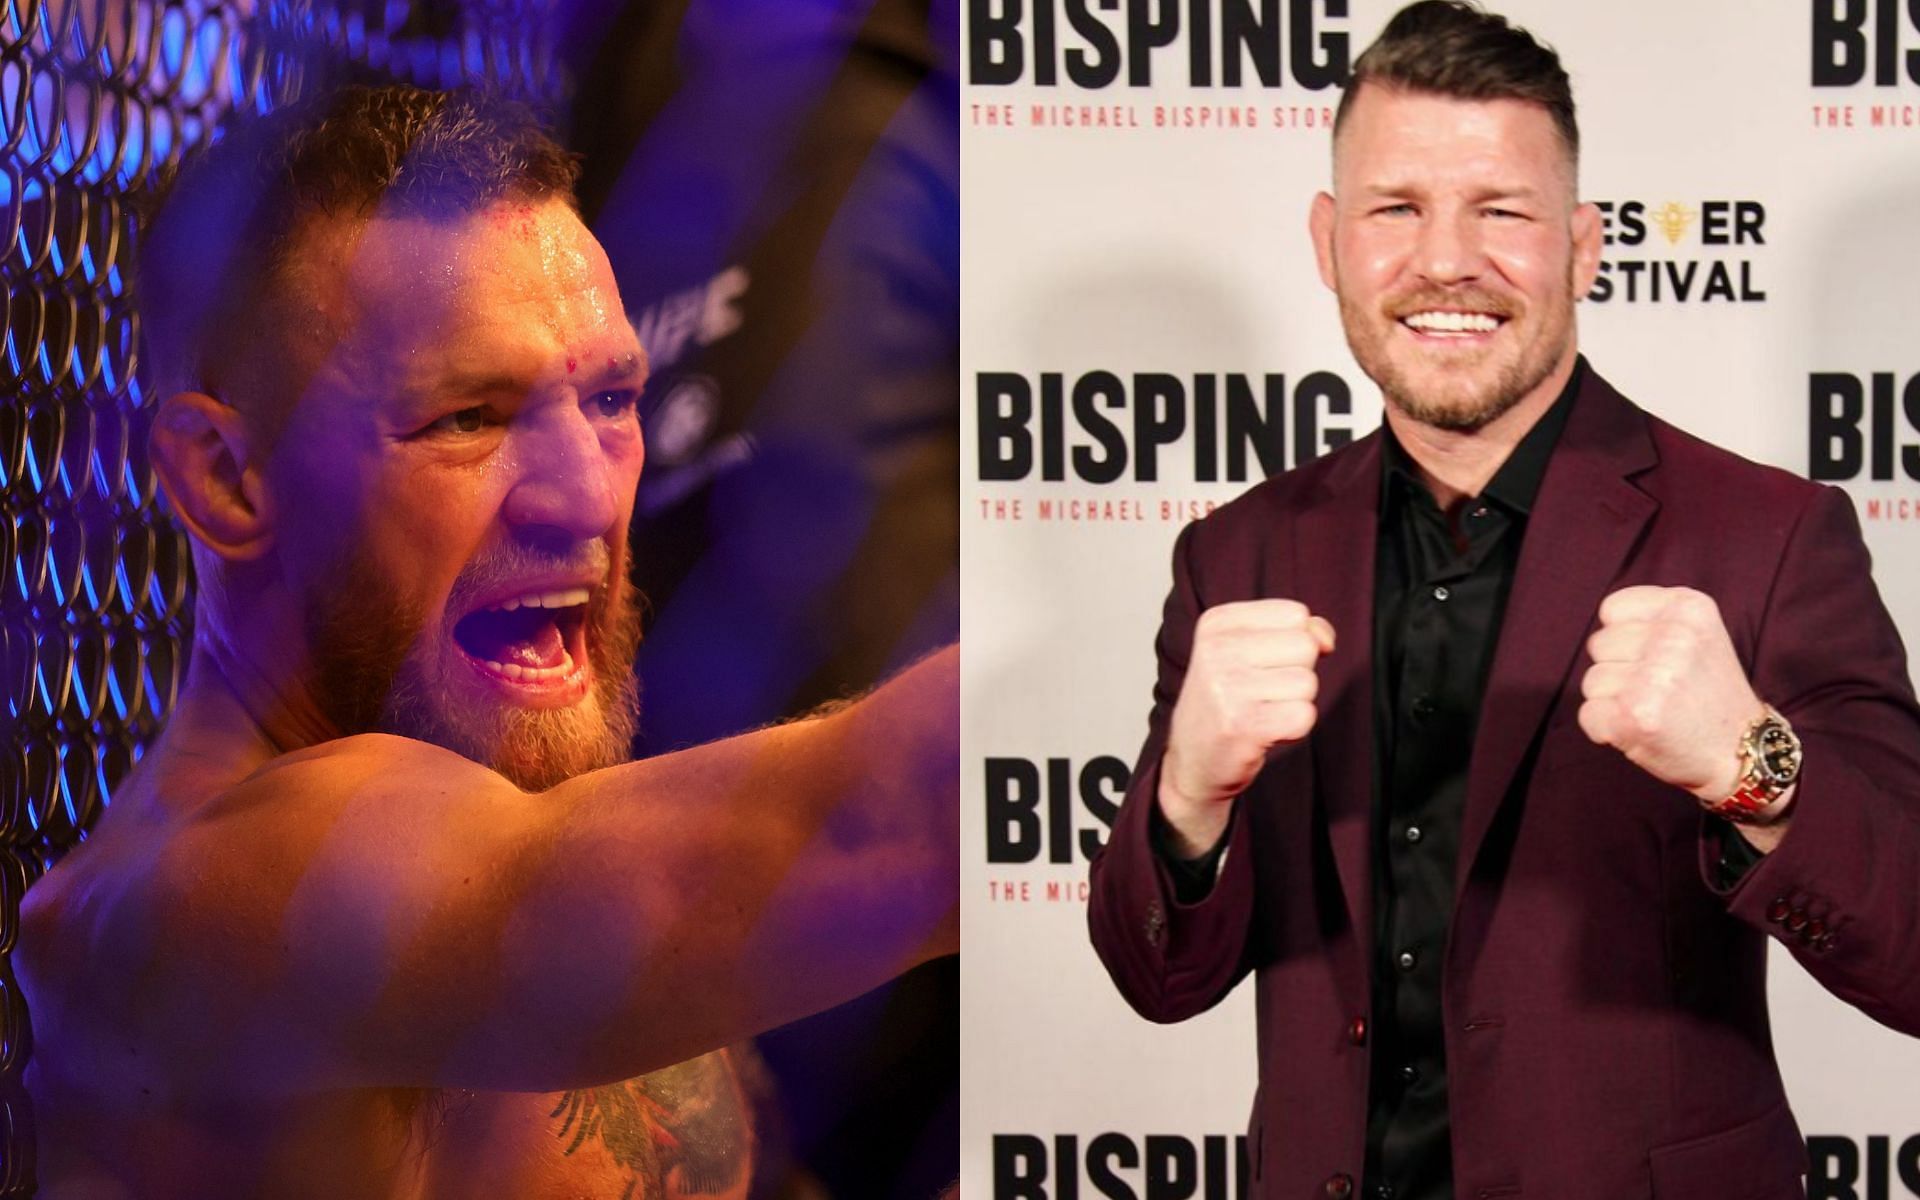 Conor McGregor (left), Michael Bisping (right) [Image courtesy of @mikebisping on Instagram]